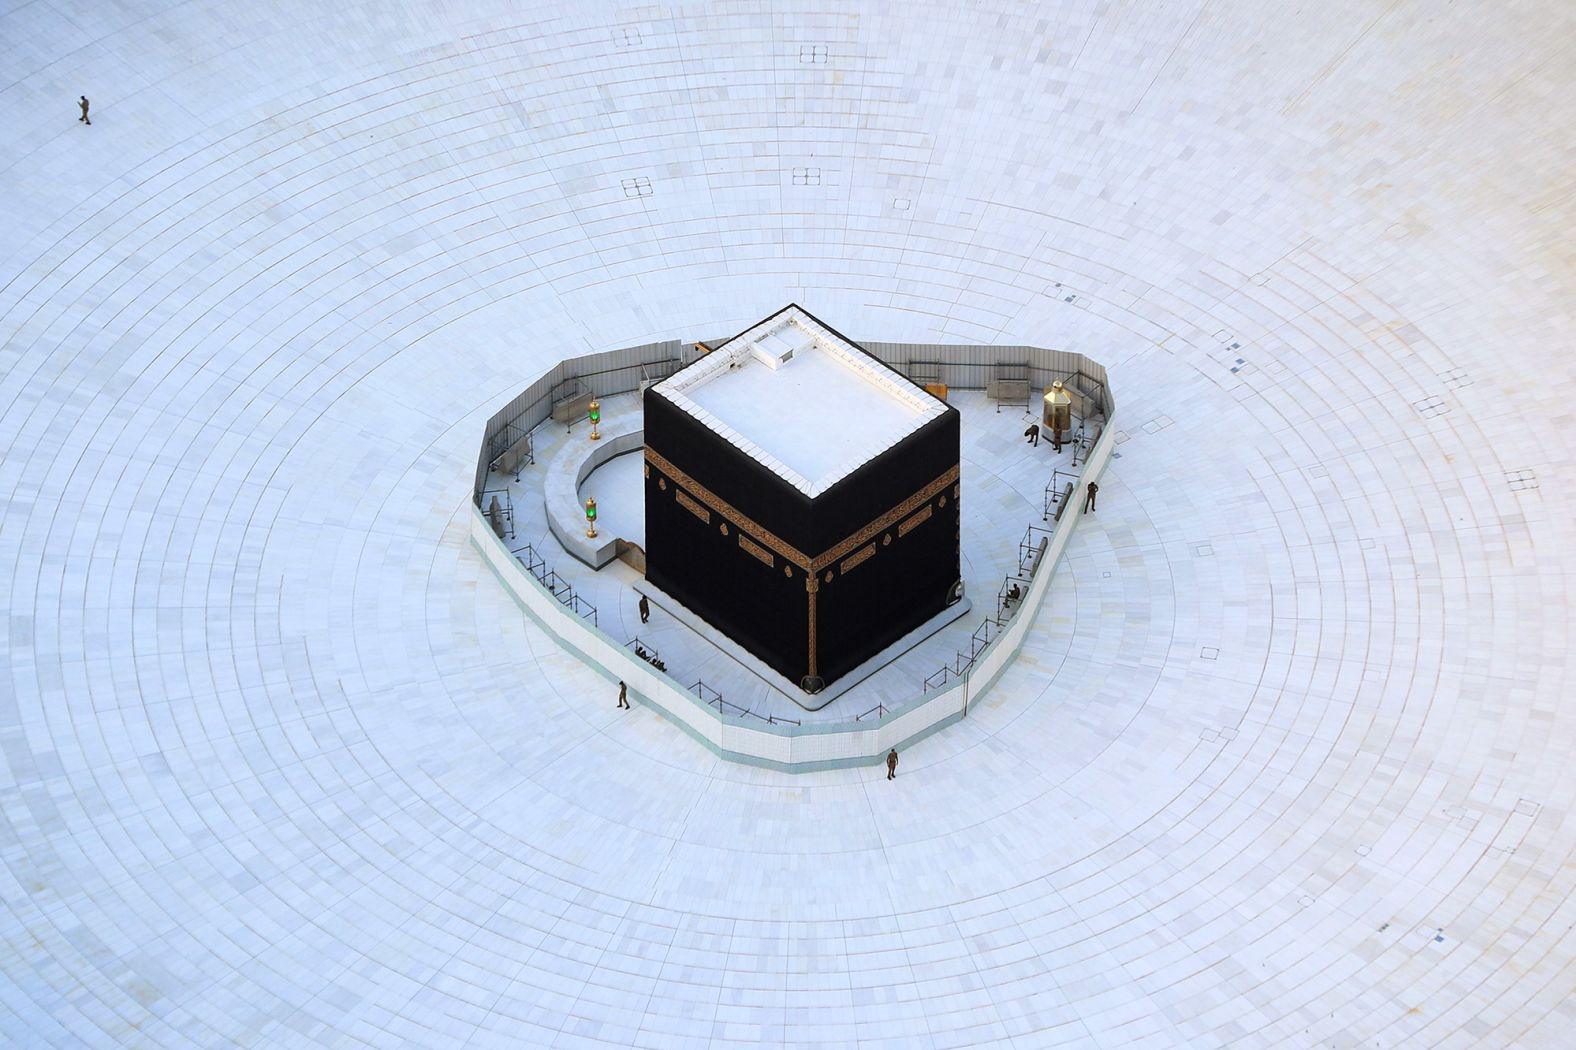 The Kaaba in the Grand Mosque, Islam's holiest site, is normally surrounded by people in Mecca, Saudi Arabia. But it was nearly empty on March 6.